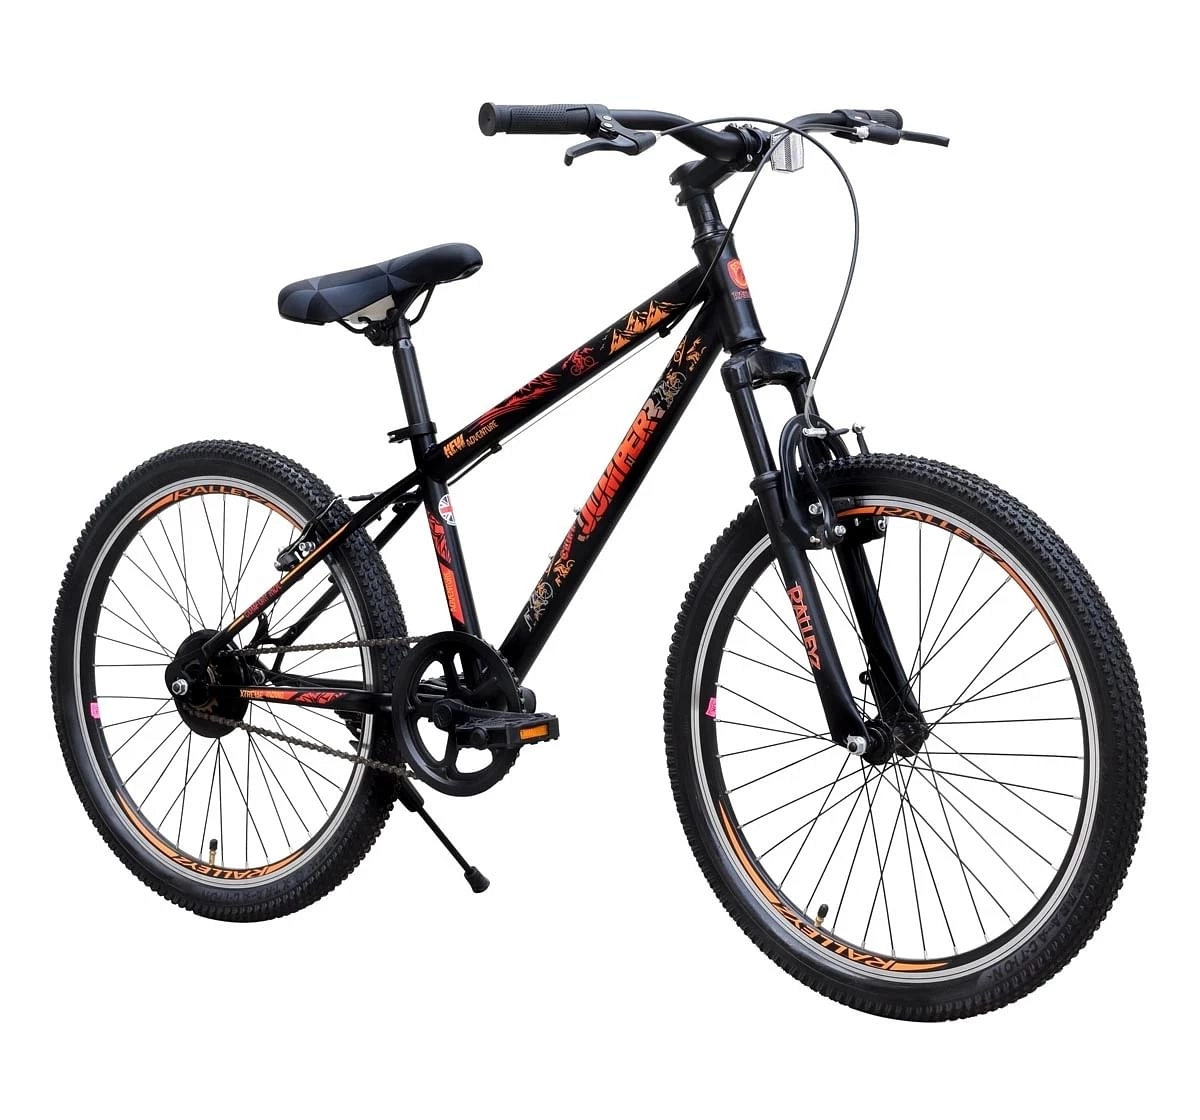 Ralleyz Astra Cliff Jumper Knight 24 Inch, Bicycles For Kids, Black, 9Y+